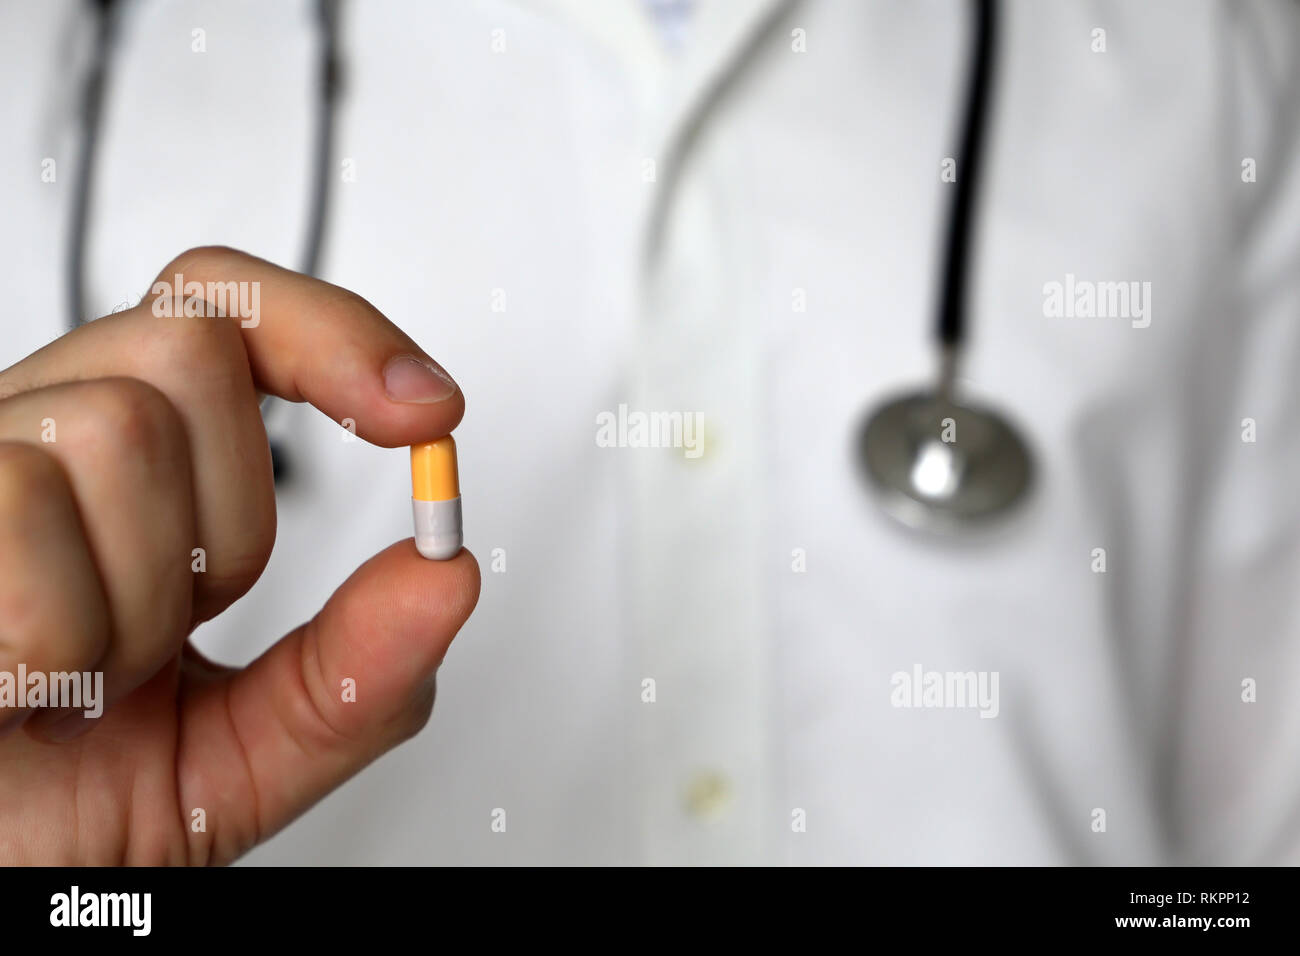 Doctor with pill, man with stethoscope holding capsule. Concept of medications, vitamins, prescription, medical exam, pharmacist Stock Photo